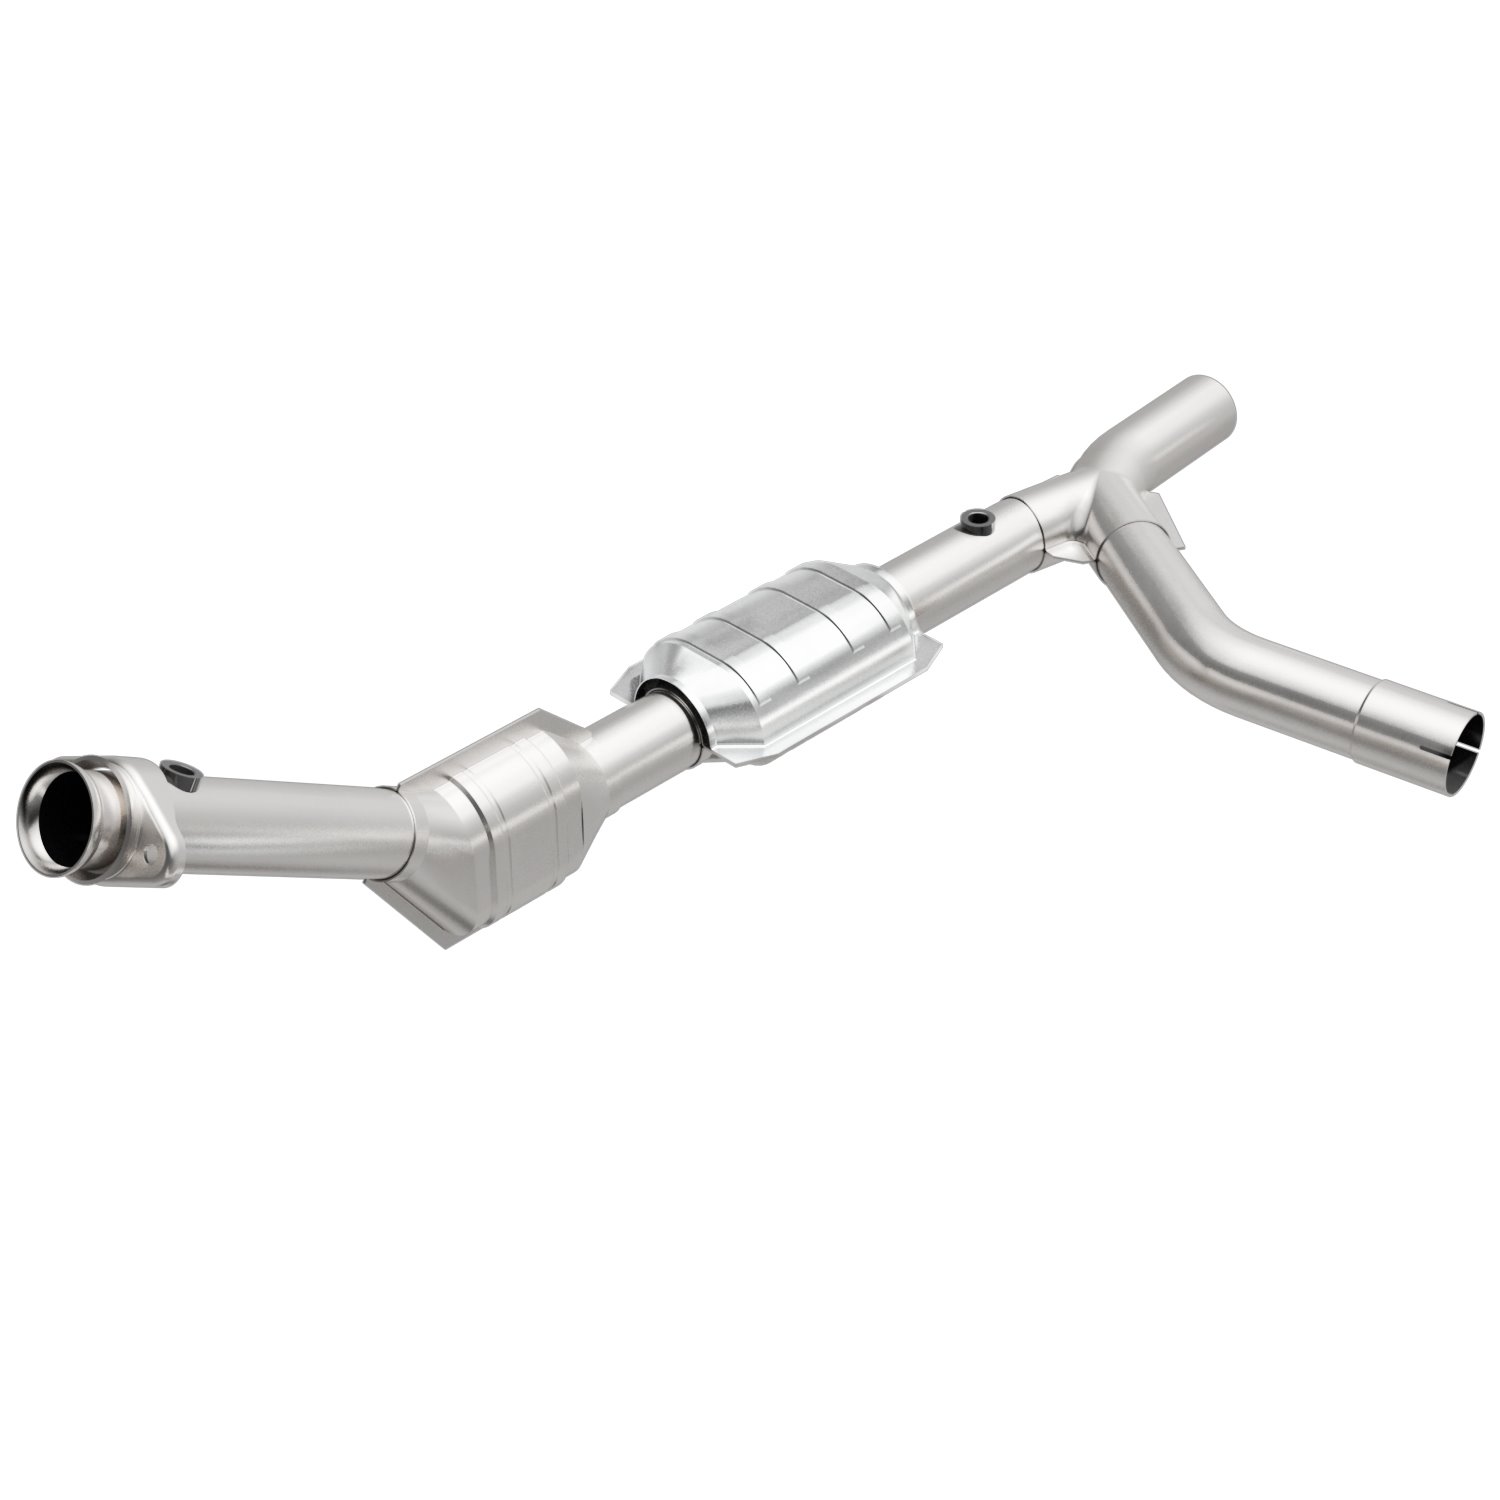 HM Grade Federal / EPA Compliant Direct-Fit Catalytic Converter 23133